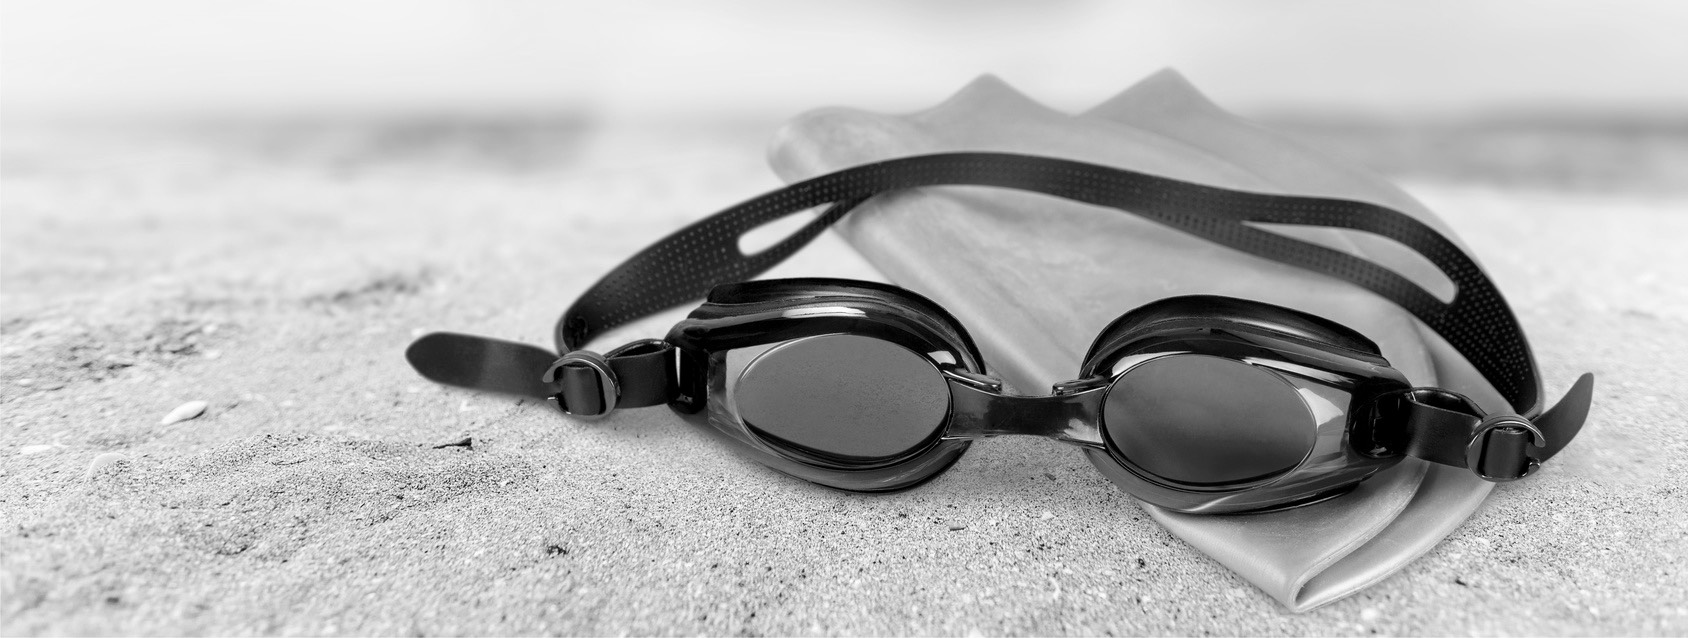 Goggles bw flipped